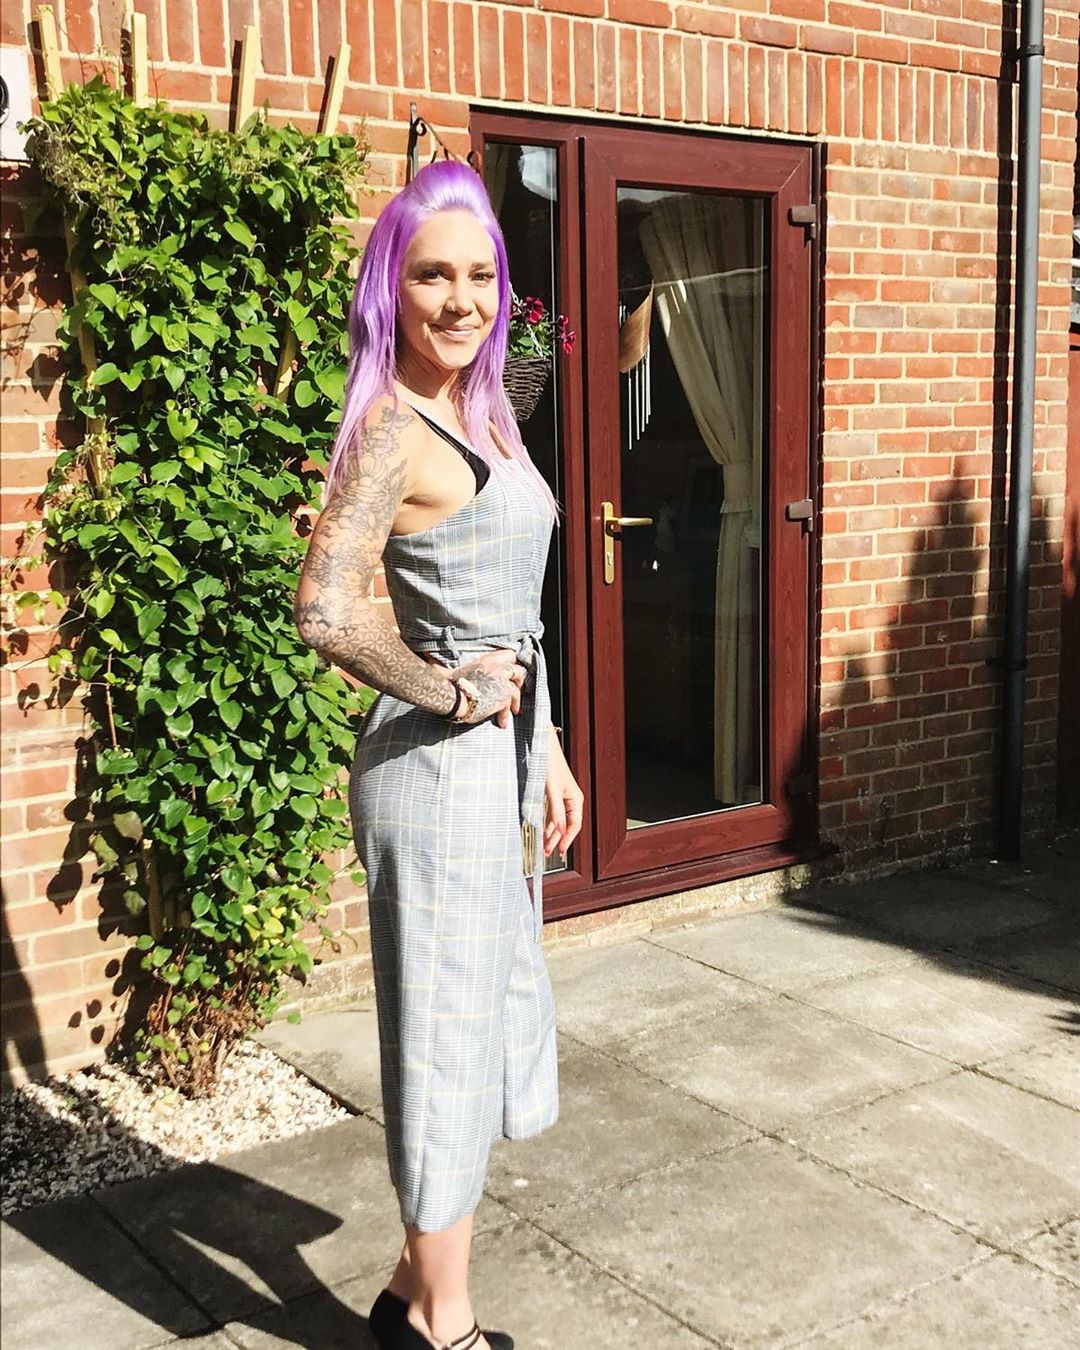 On the Brink of Death, Anorexic Teen Weighed 55lb – but Bodybuilding Saved Her Life